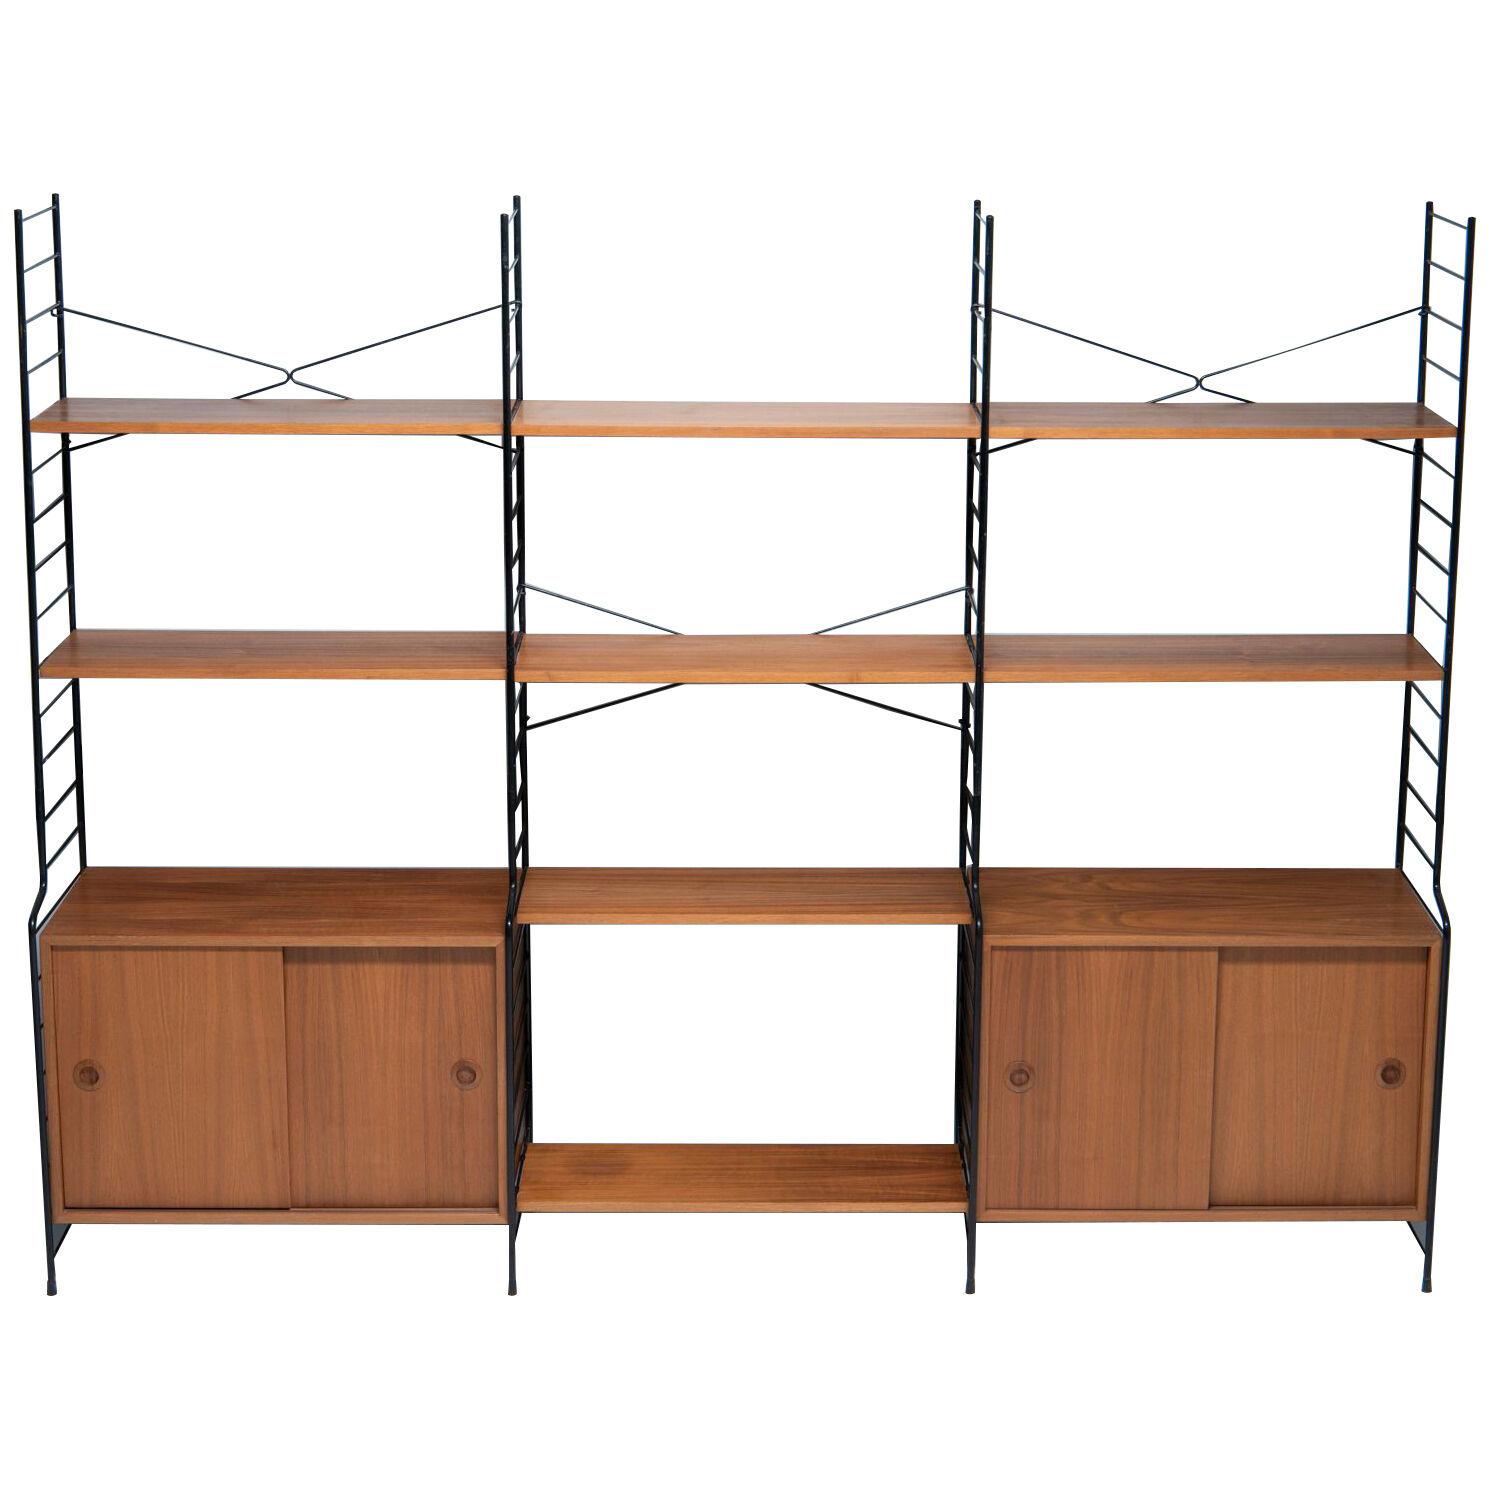 Shelving system in teak, WHB, 1960's, GERMANY